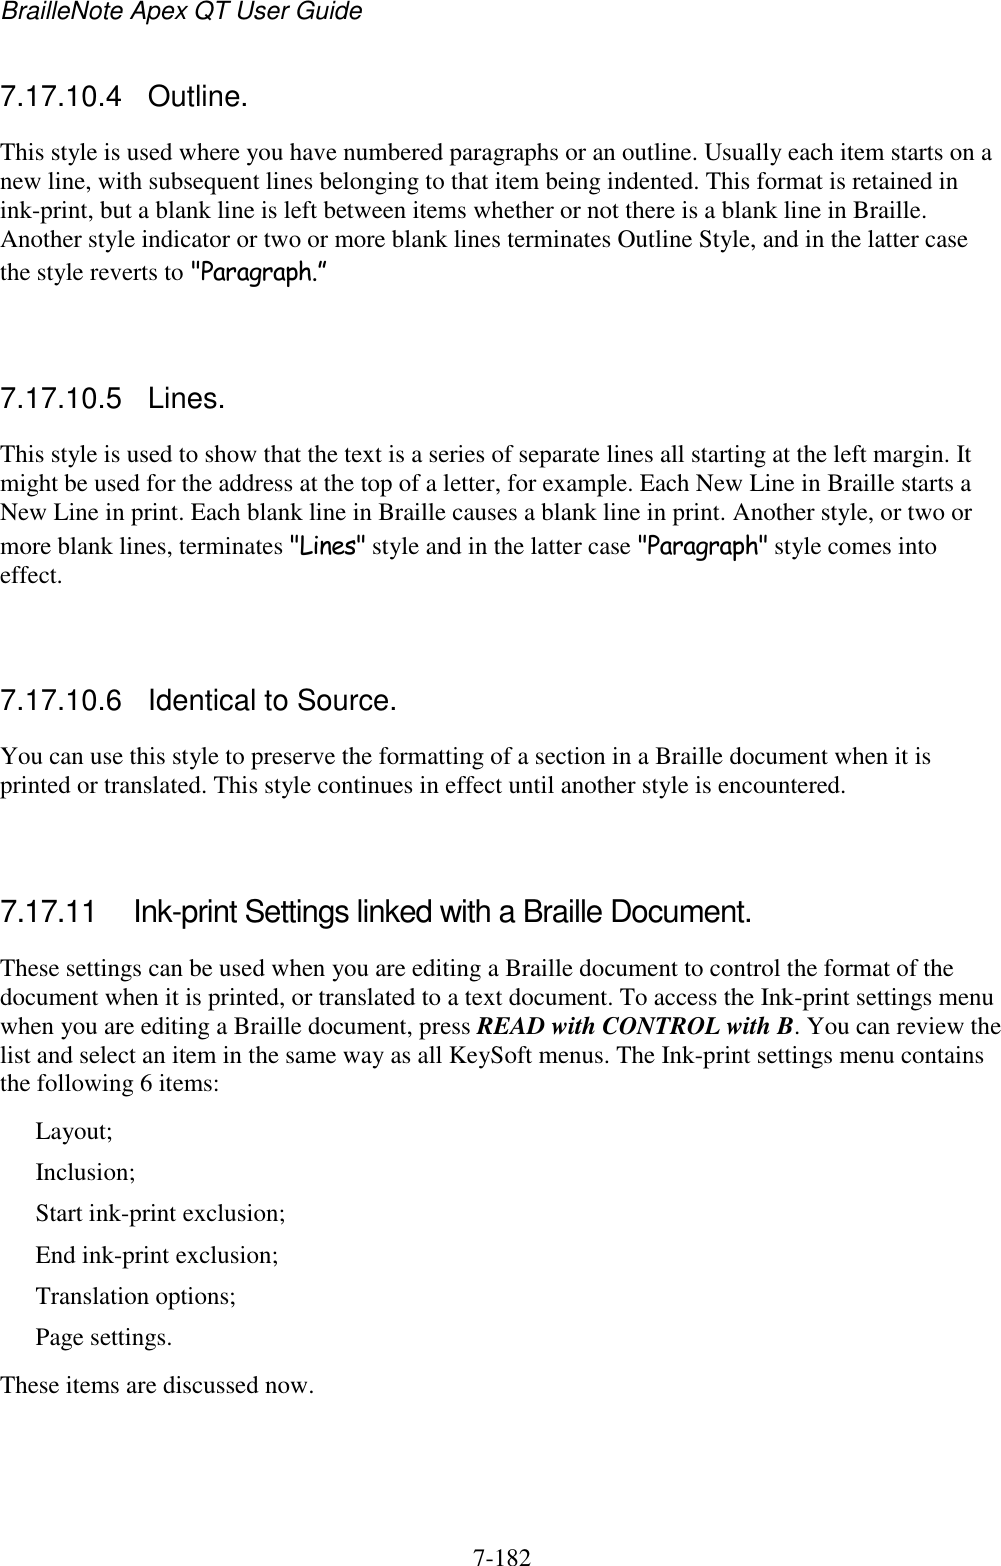 BrailleNote Apex QT User Guide  7-182   7.17.10.4  Outline. This style is used where you have numbered paragraphs or an outline. Usually each item starts on a new line, with subsequent lines belonging to that item being indented. This format is retained in ink-print, but a blank line is left between items whether or not there is a blank line in Braille. Another style indicator or two or more blank lines terminates Outline Style, and in the latter case the style reverts to &quot;Paragraph.”   7.17.10.5  Lines. This style is used to show that the text is a series of separate lines all starting at the left margin. It might be used for the address at the top of a letter, for example. Each New Line in Braille starts a New Line in print. Each blank line in Braille causes a blank line in print. Another style, or two or more blank lines, terminates &quot;Lines&quot; style and in the latter case &quot;Paragraph&quot; style comes into effect.   7.17.10.6  Identical to Source. You can use this style to preserve the formatting of a section in a Braille document when it is printed or translated. This style continues in effect until another style is encountered.   7.17.11  Ink-print Settings linked with a Braille Document. These settings can be used when you are editing a Braille document to control the format of the document when it is printed, or translated to a text document. To access the Ink-print settings menu when you are editing a Braille document, press READ with CONTROL with B. You can review the list and select an item in the same way as all KeySoft menus. The Ink-print settings menu contains the following 6 items: Layout; Inclusion; Start ink-print exclusion; End ink-print exclusion; Translation options; Page settings. These items are discussed now.   